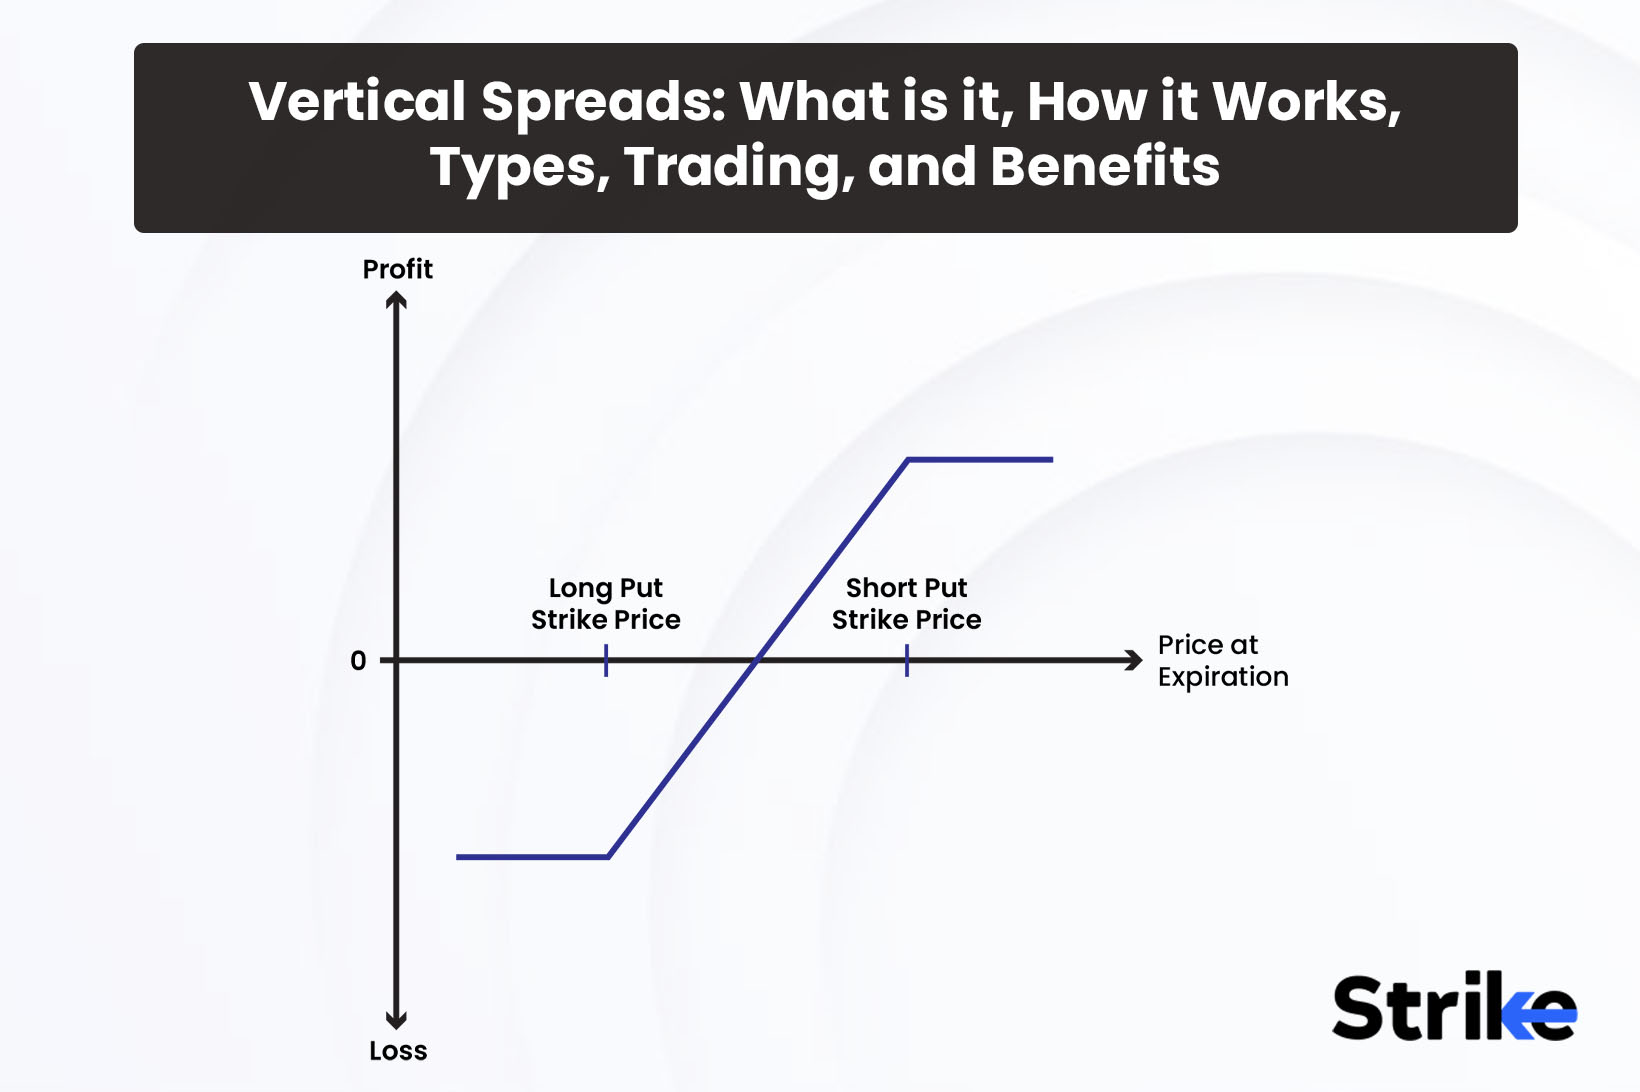 Vertical Spreads: What is it, How it Works, Types, Trading, and Benefits